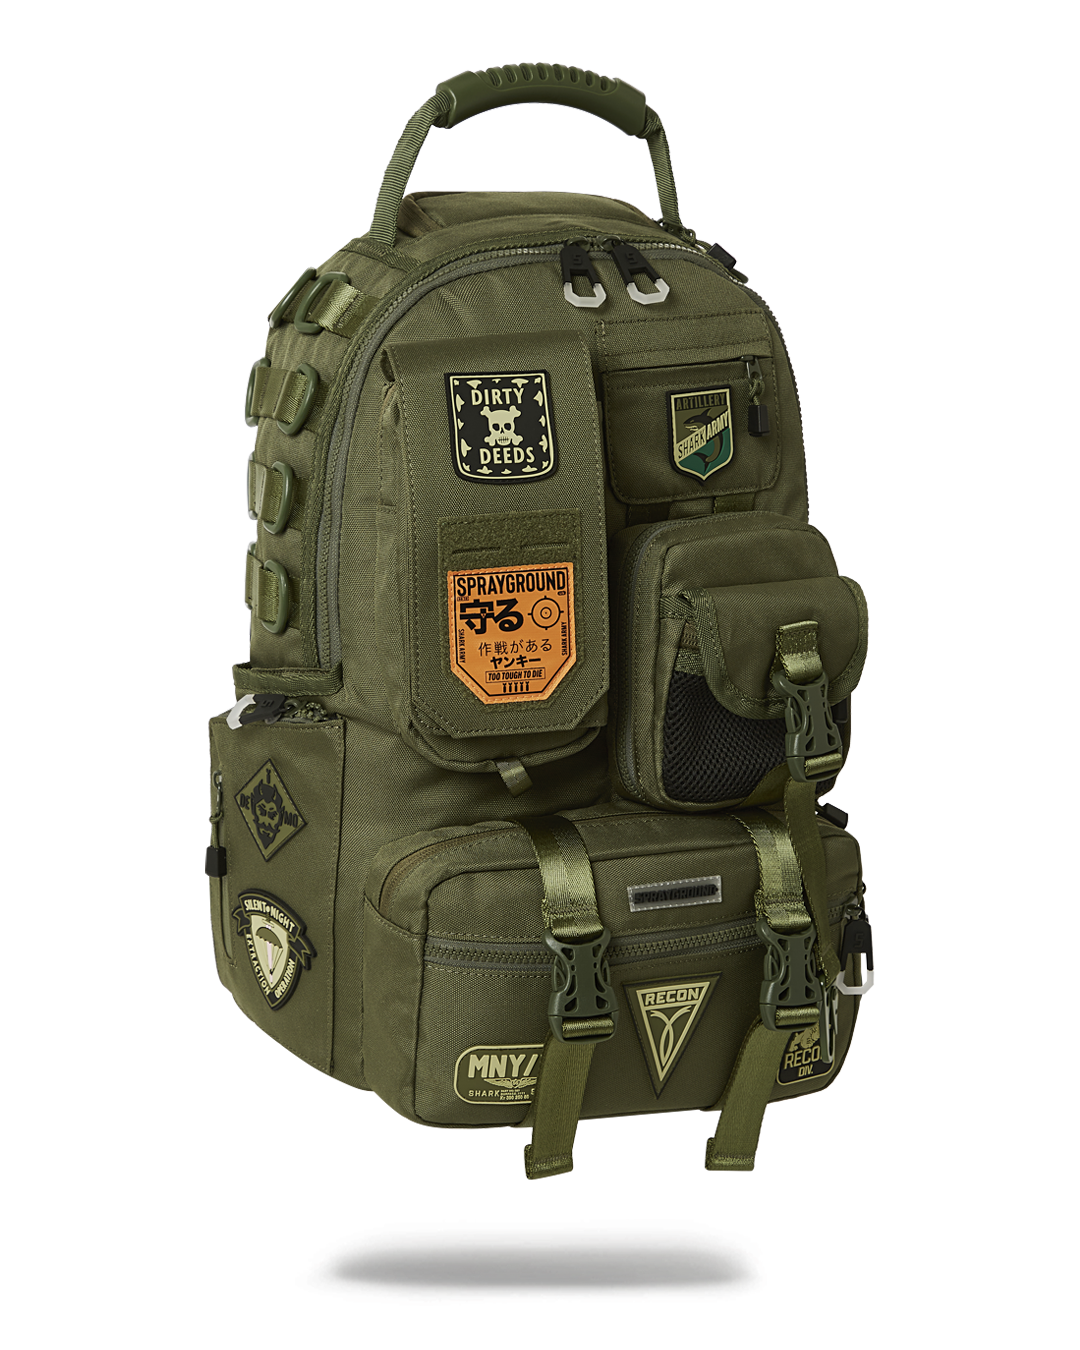 Sprayground Special Ops Checkered Shark Backpack Black Type-613